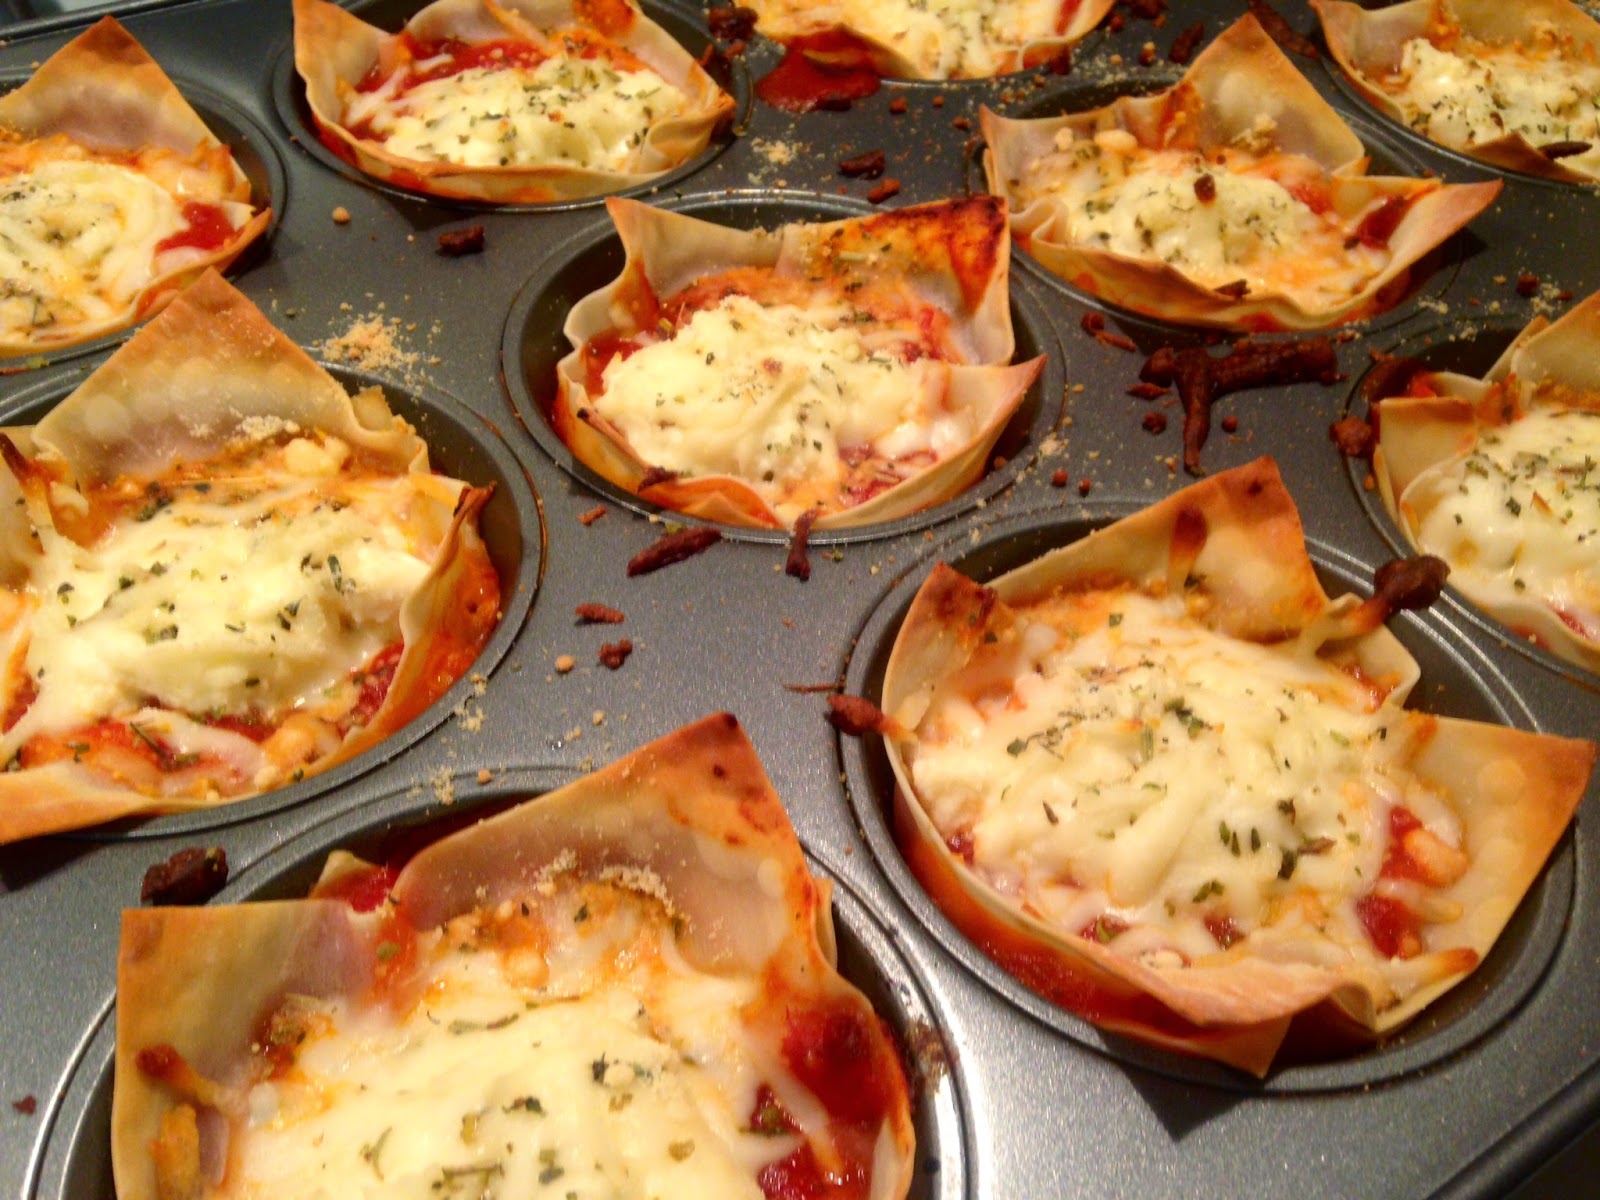 How To, How Hard, and How Much: How to Make Mini Lasagnas